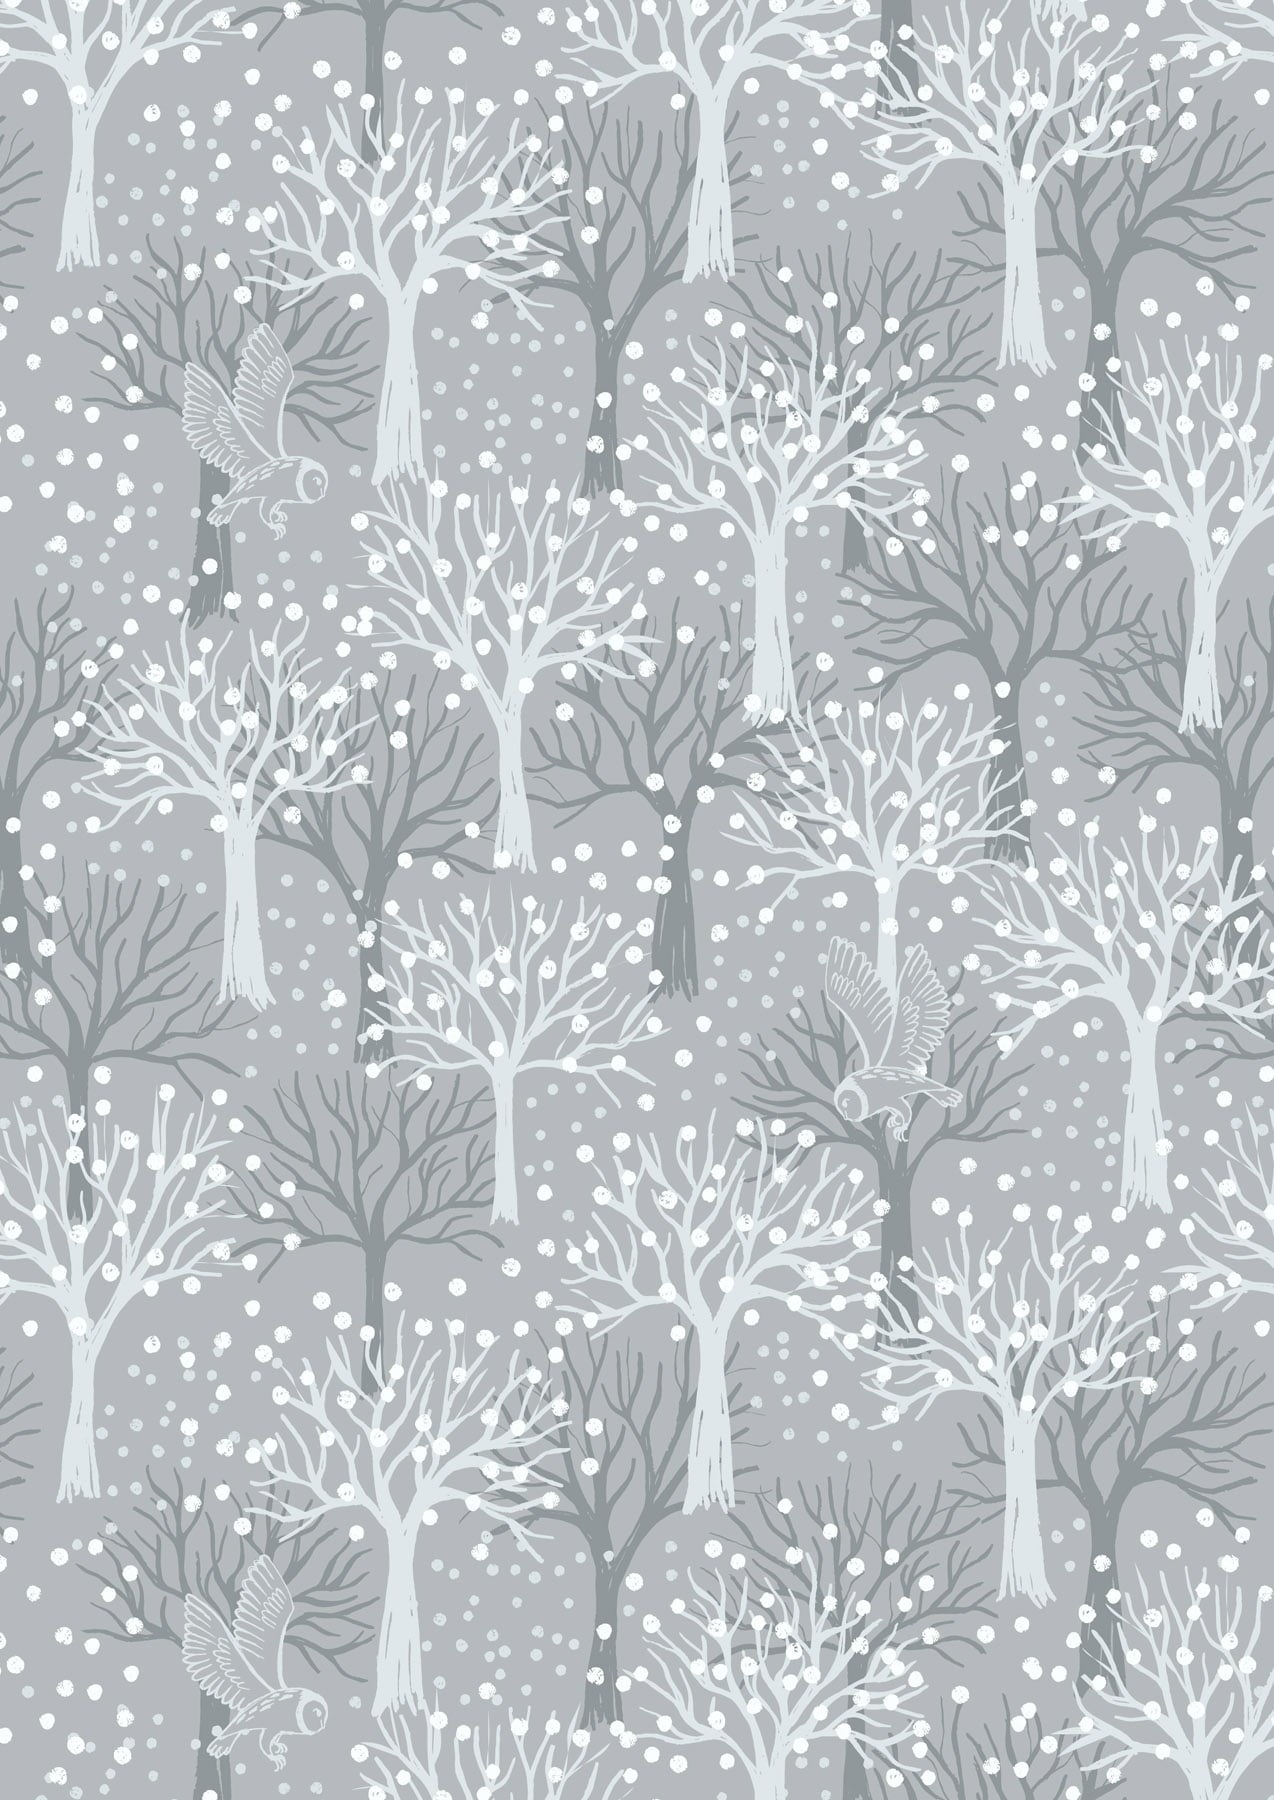 The Secret Garden - Owl Orchard on Light Grey With Pearl Elements